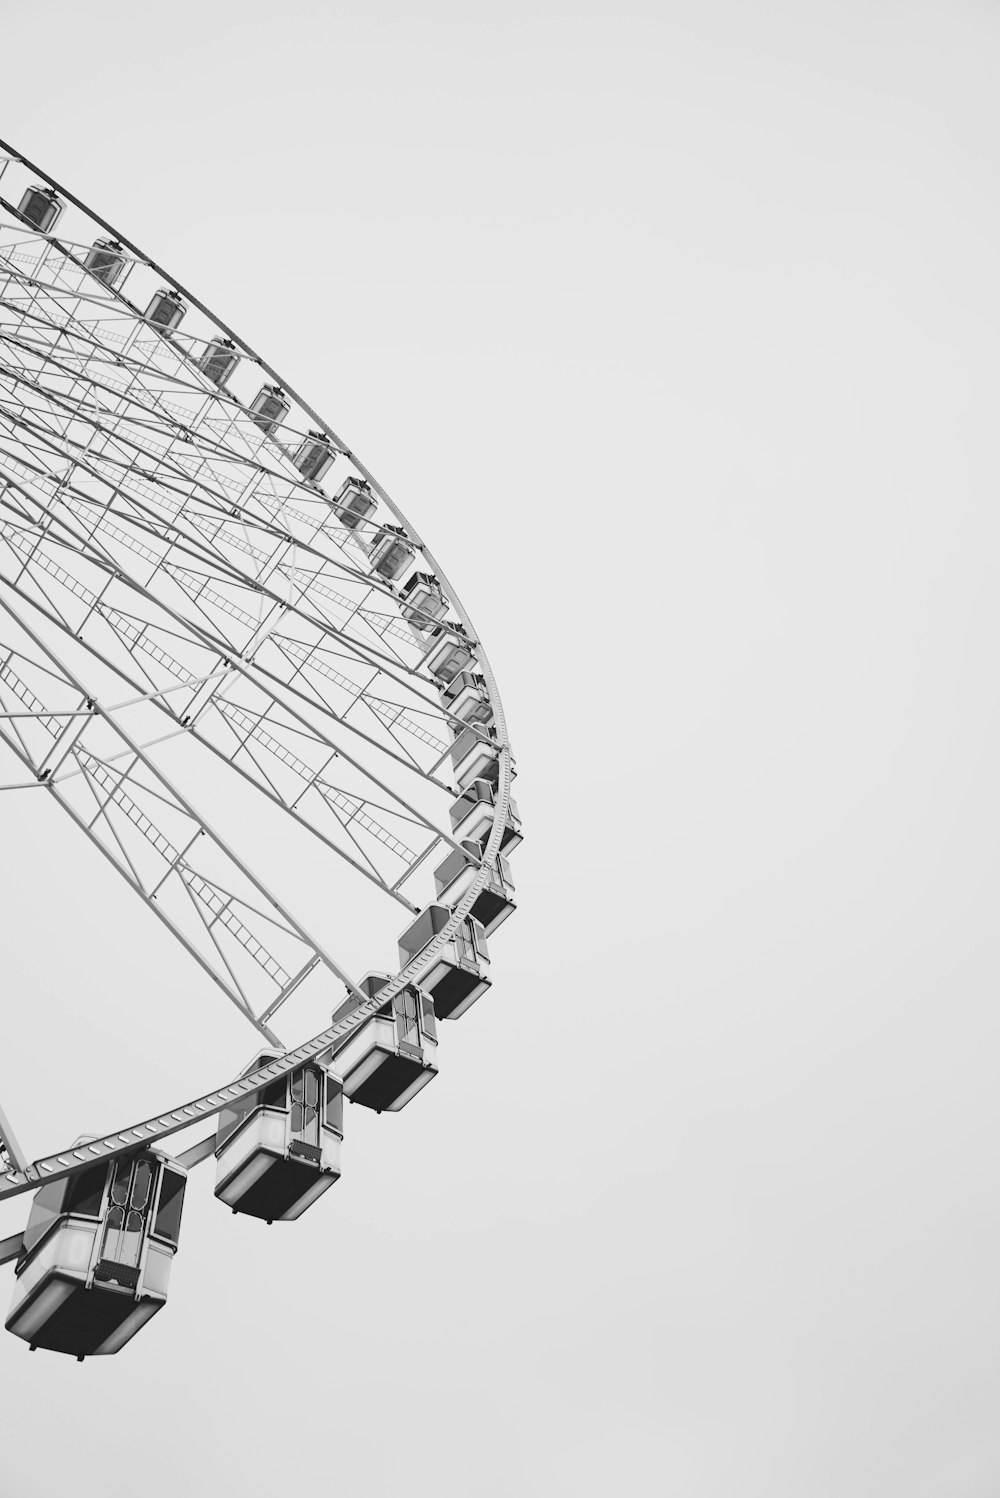 low-angle view of gray ferriswheel